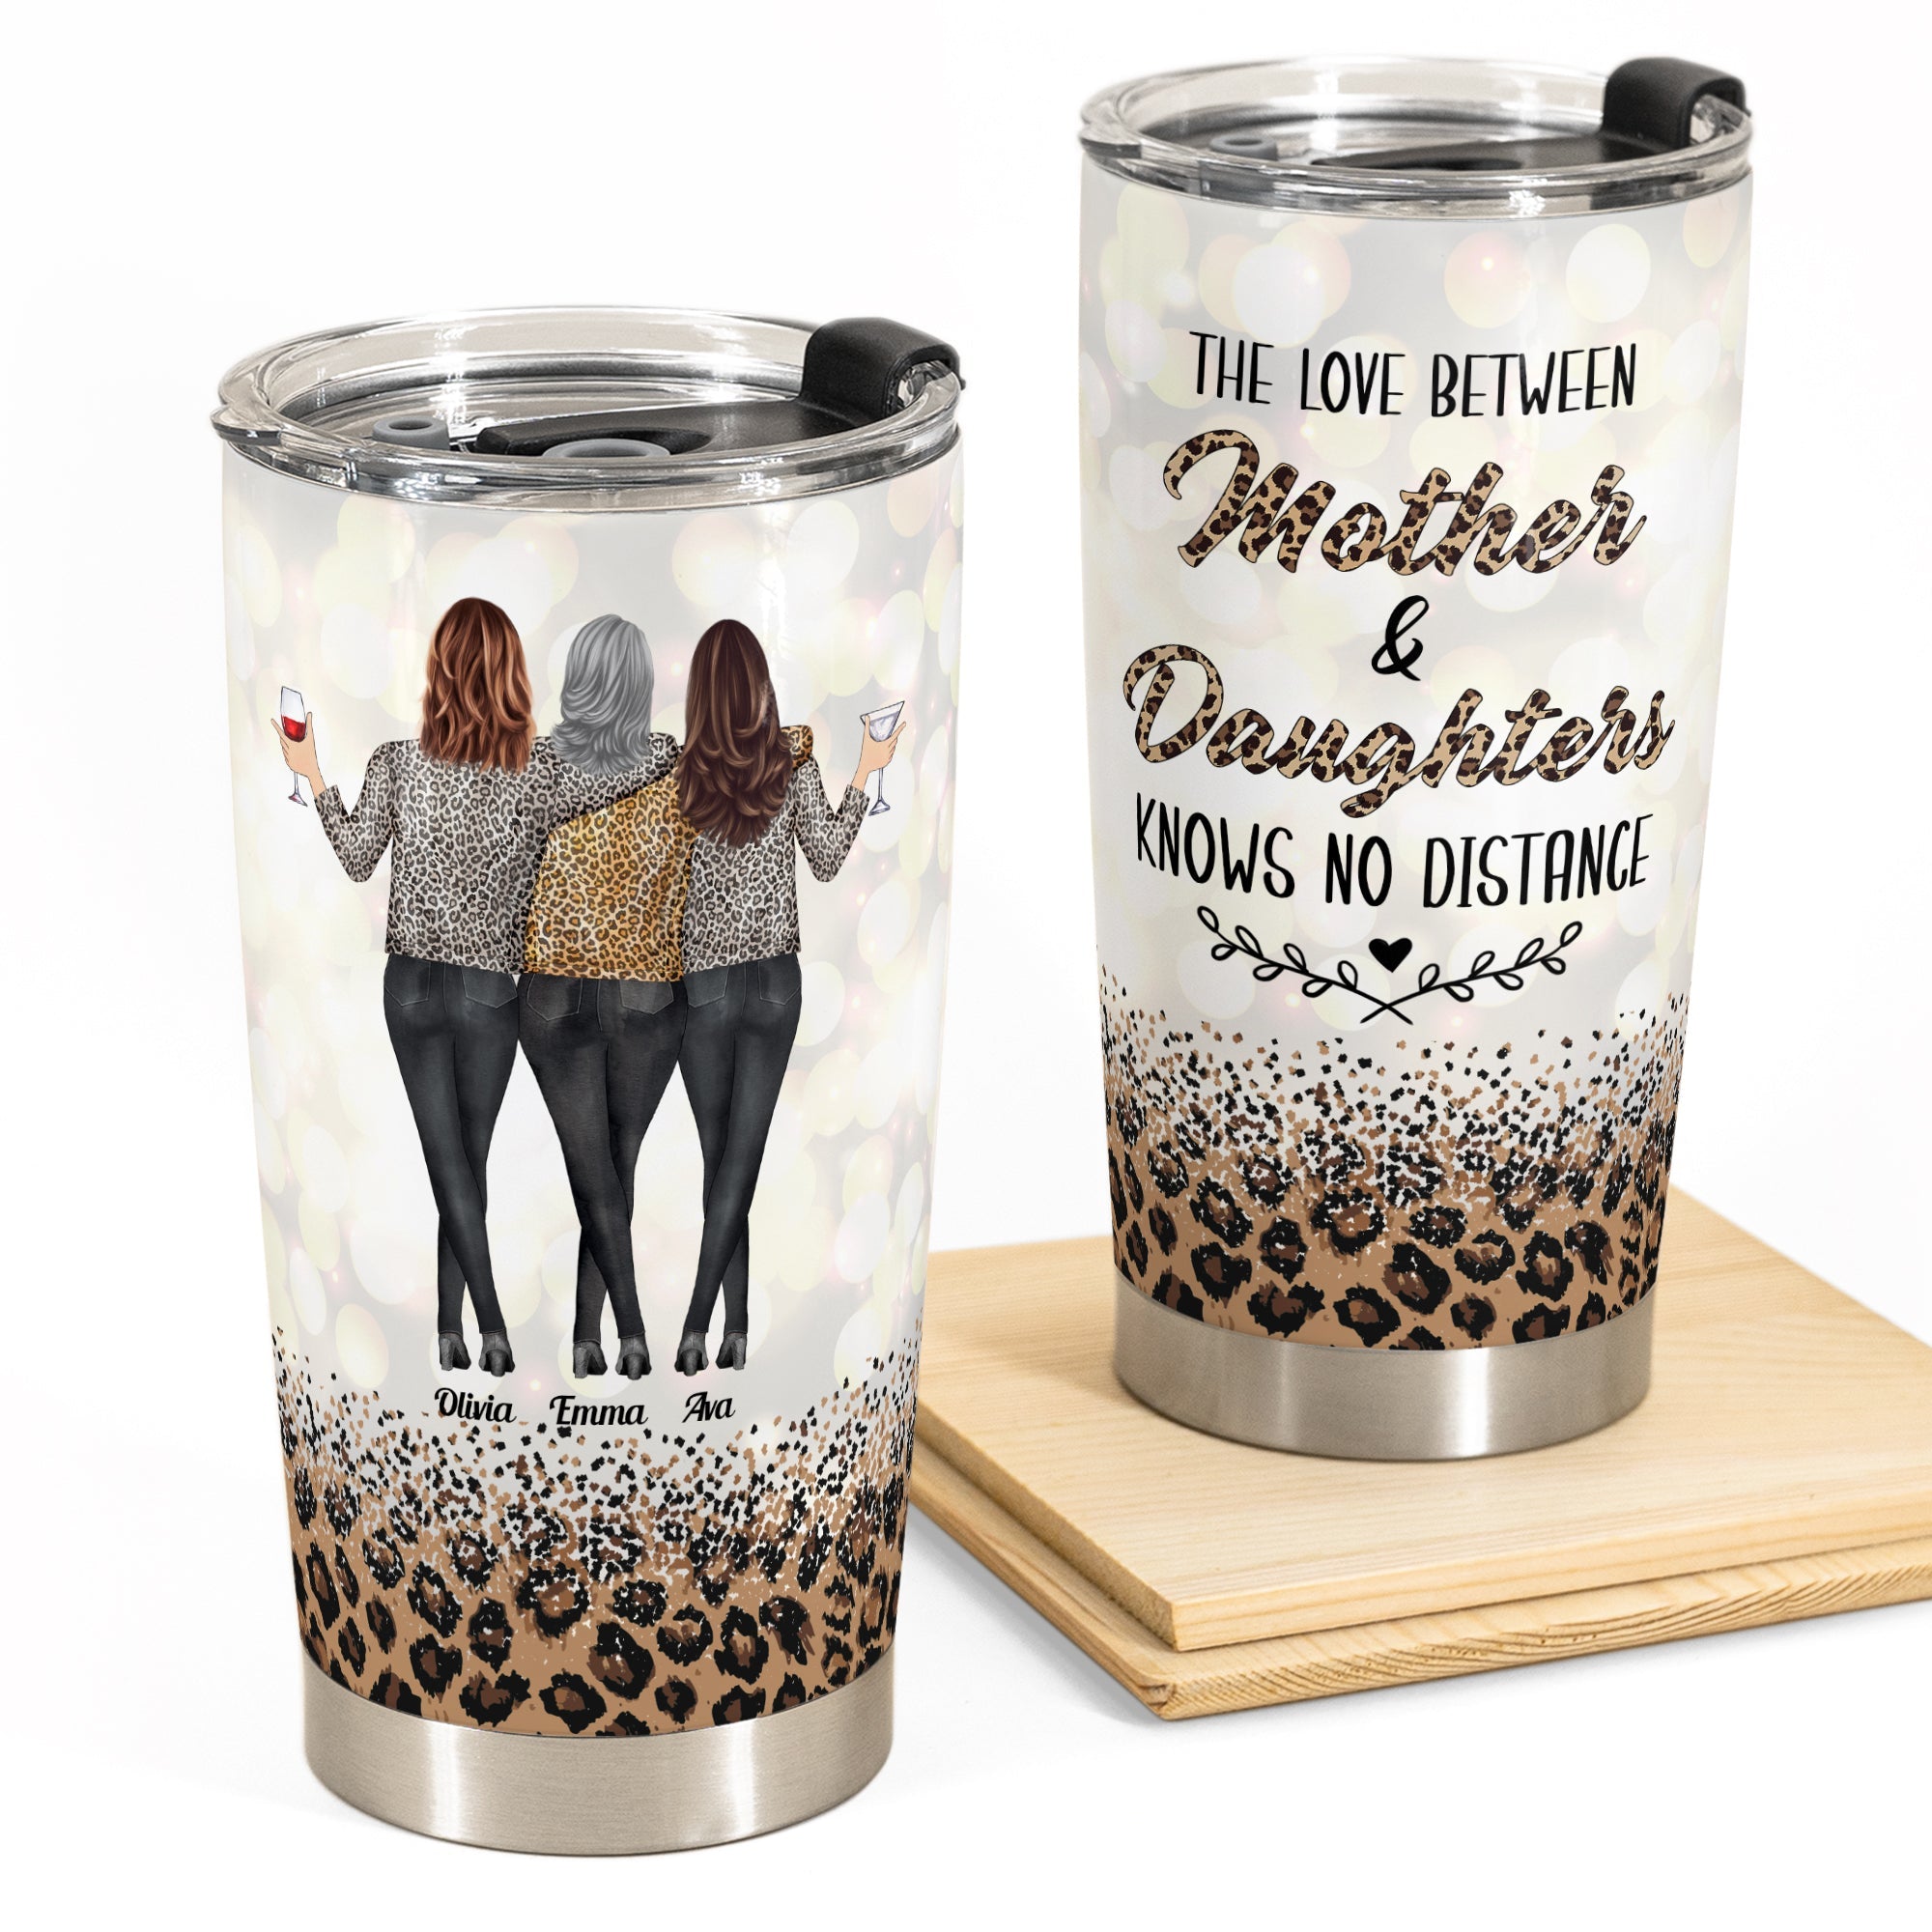 Tumbler Drinking Glass Unique Mom Gifts, Birthday Gifts for Mom